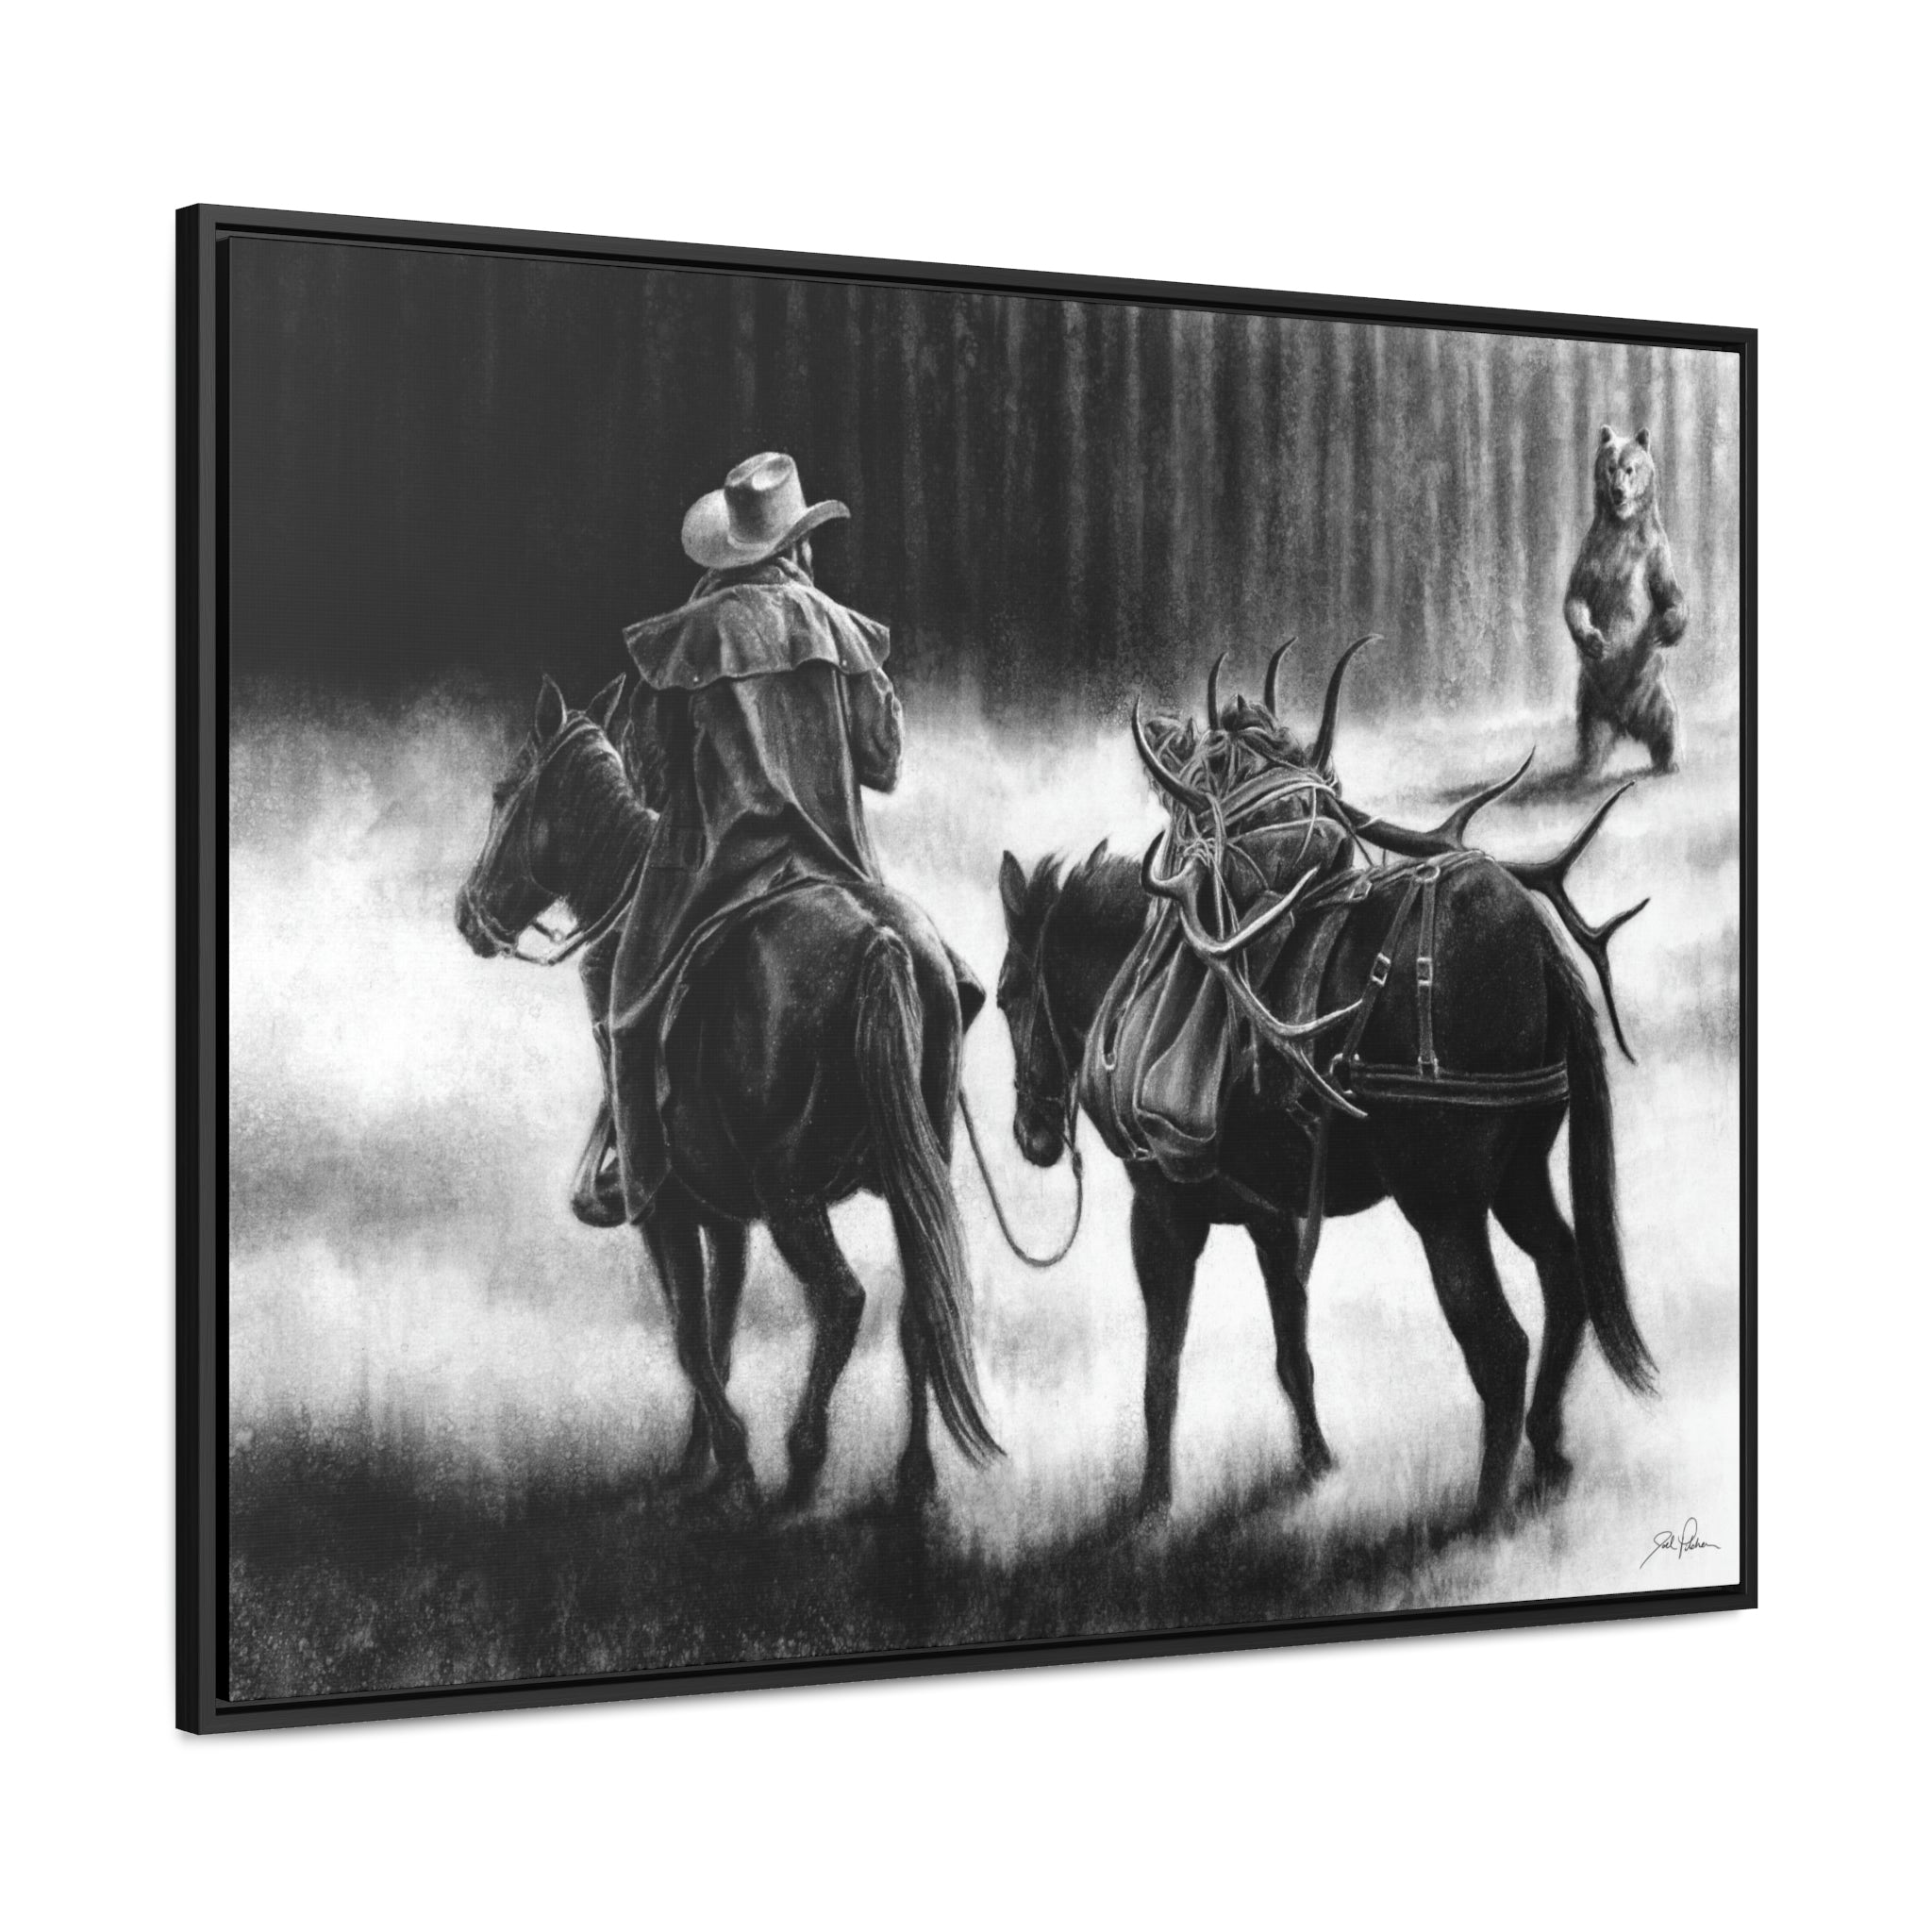 "Just Passin' Through" Gallery Wrapped/Framed Canvas